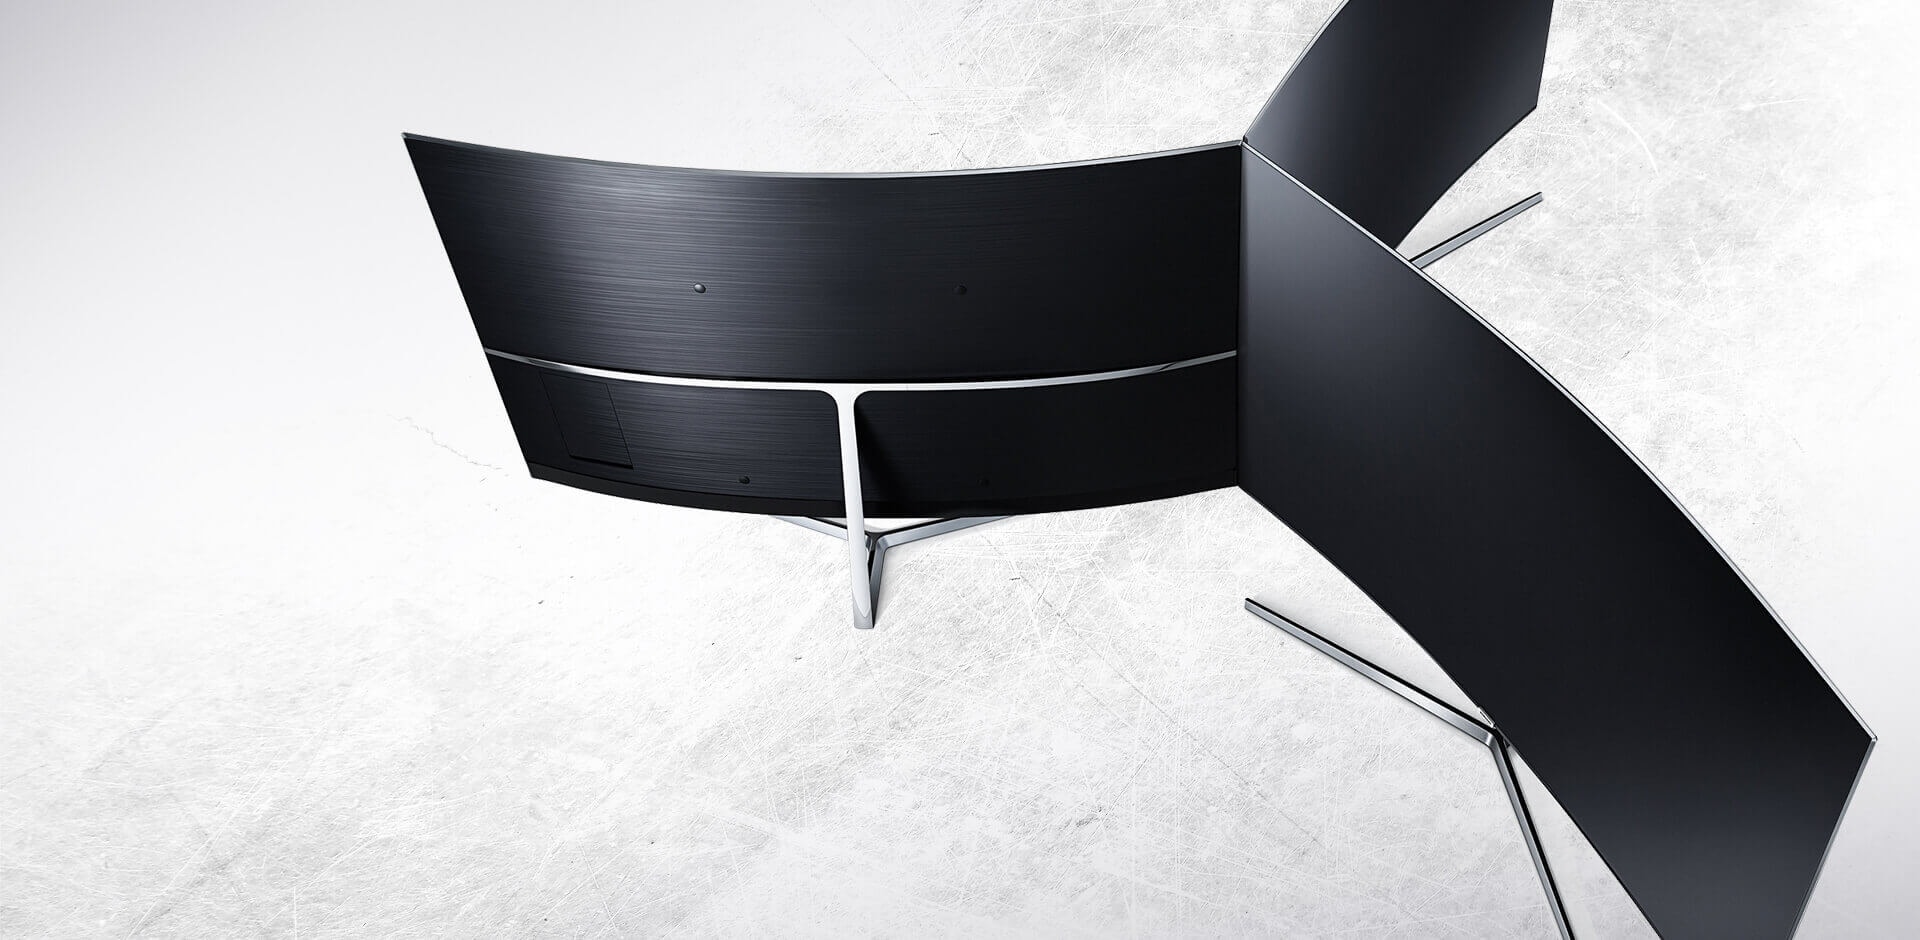 Top view of 3 curved Samsung TVs and it shows beautiful design.